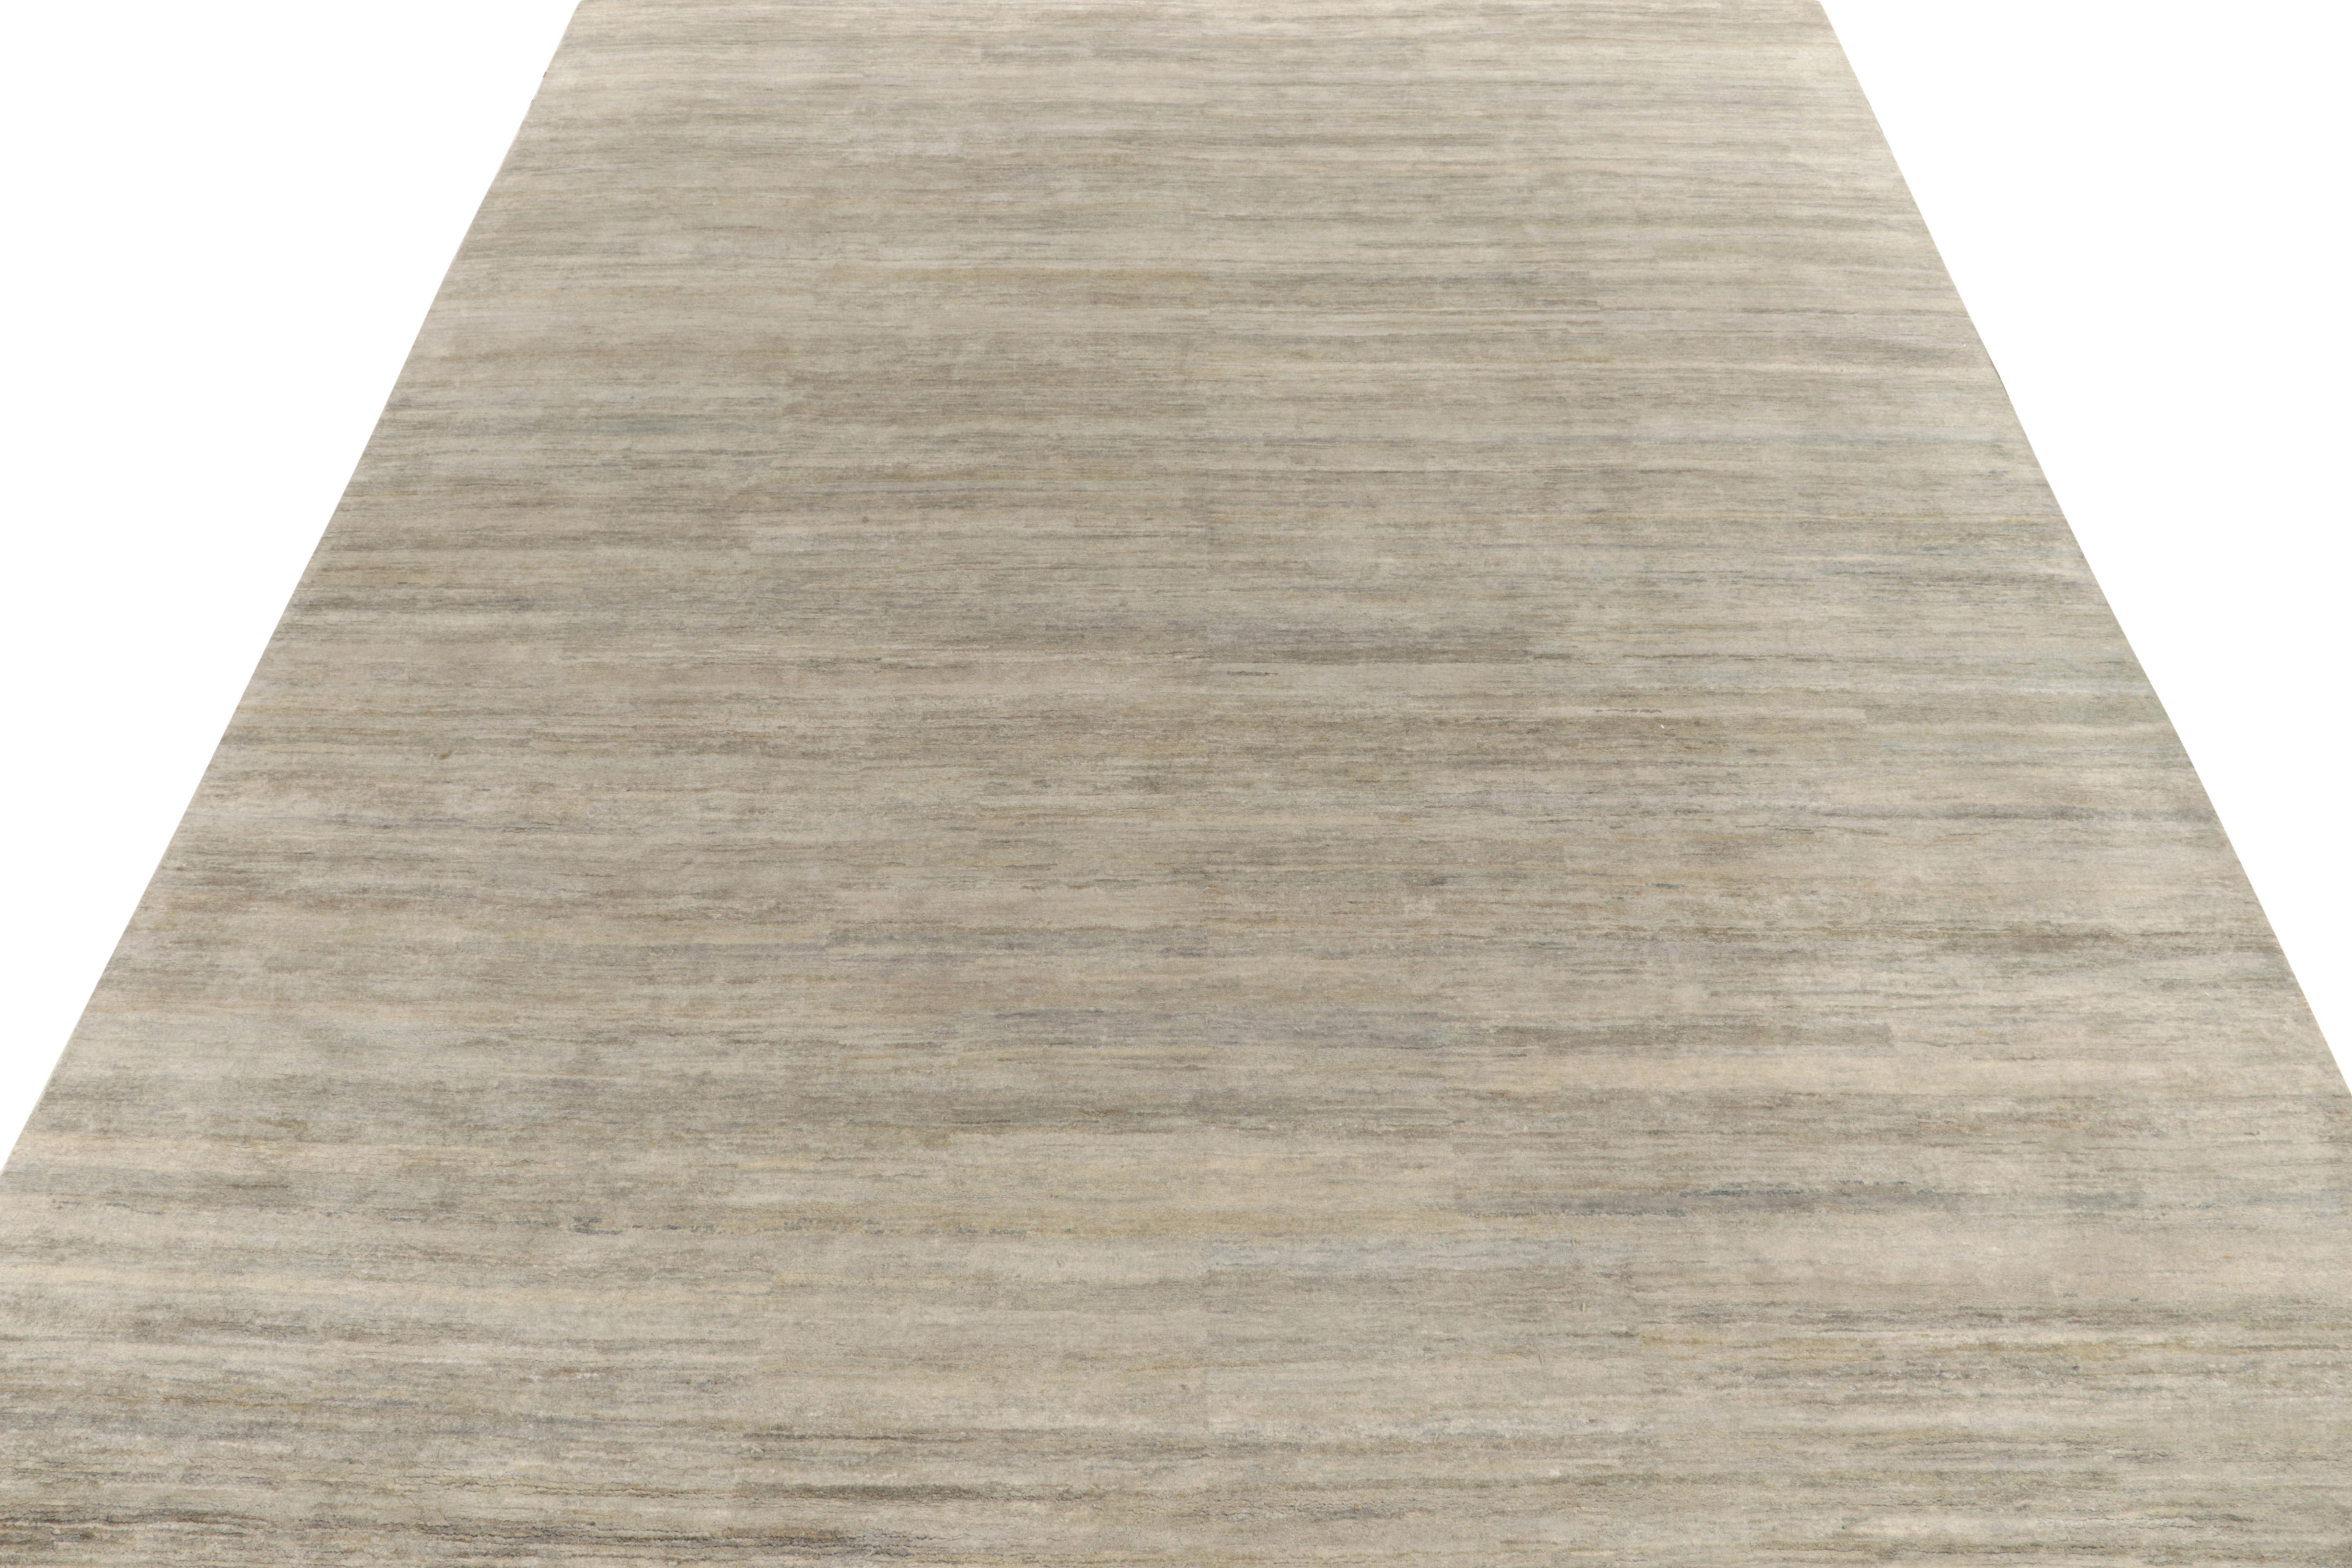 Rug & Kilim introduces its refined take on modern aesthetics with this smart, solid gray rug in a 12×15 rug from our Texture of Color collection. The contemporary piece relishes a mature colorway of silver-gray, light blue & beige-brown